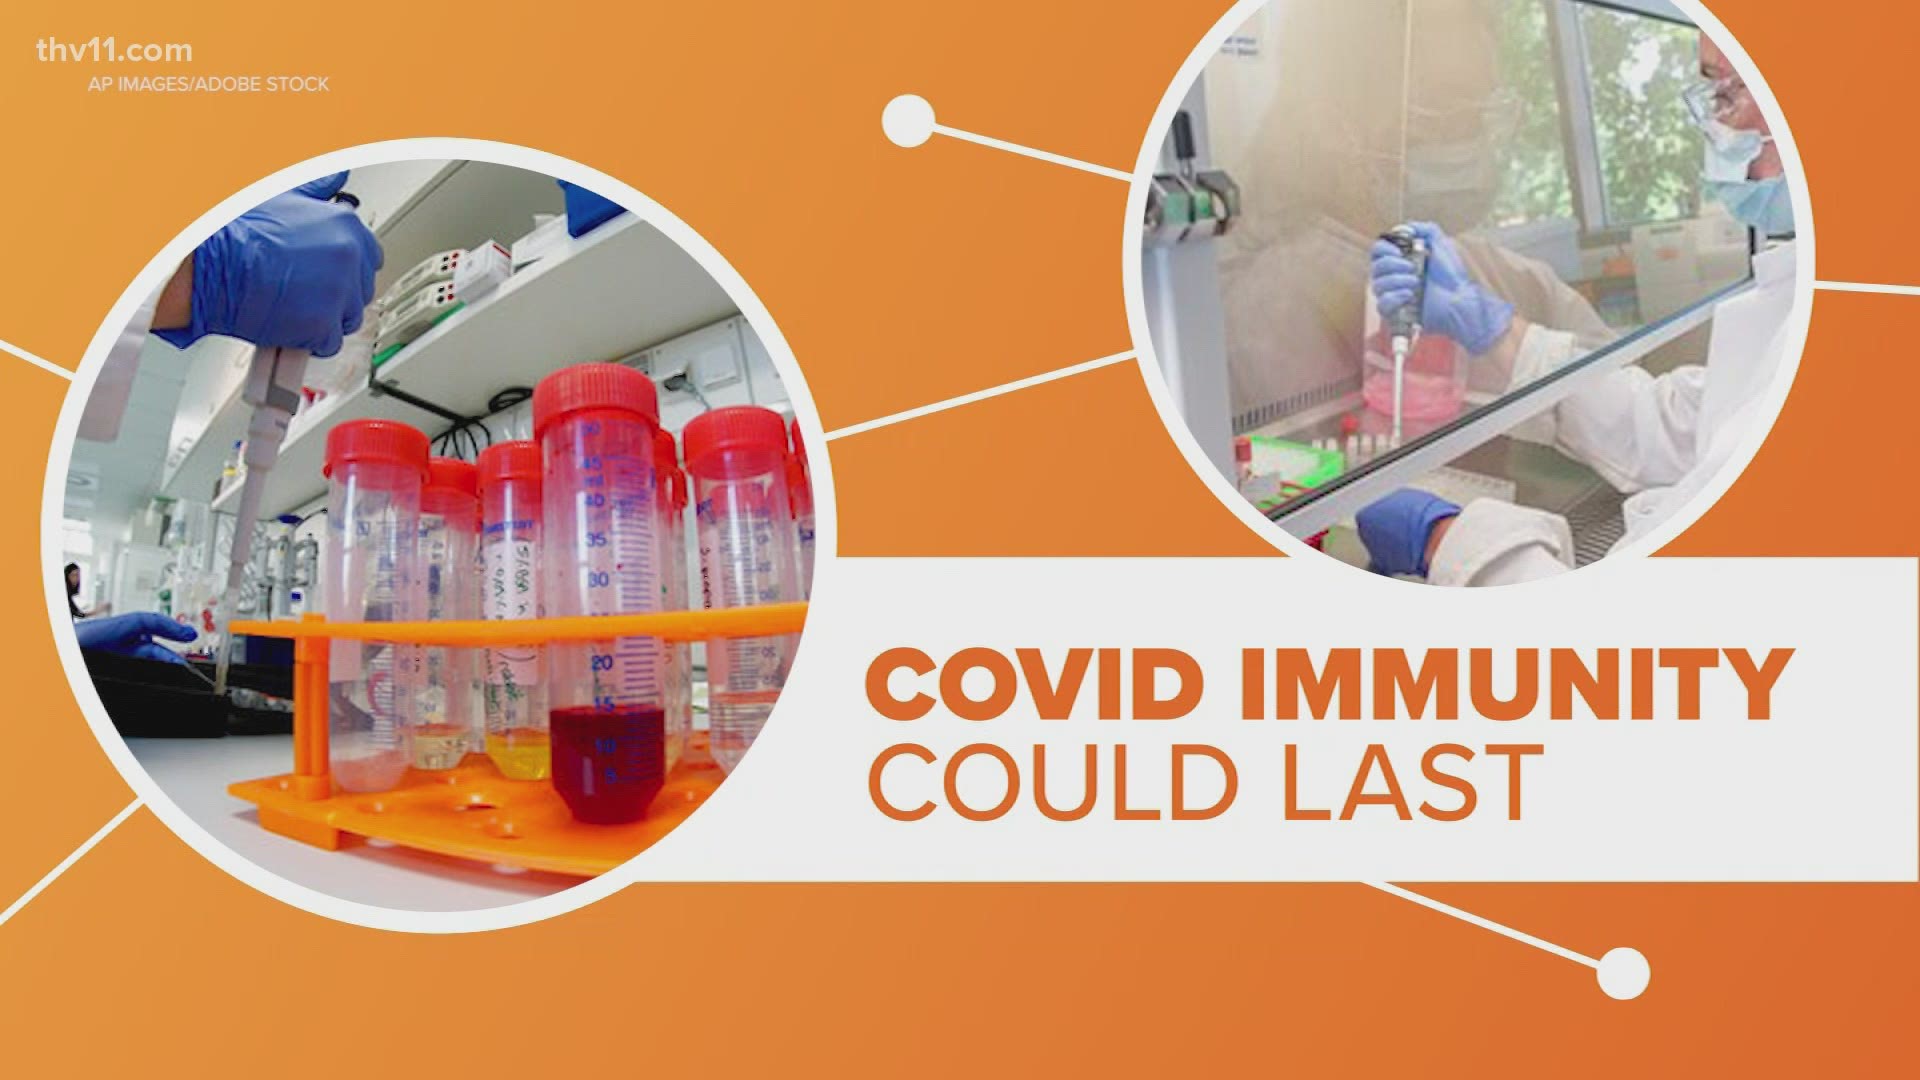 We're learning new details about a fantastic report out this week on COVID immunity. Millions of Americans may not need a booster shot.